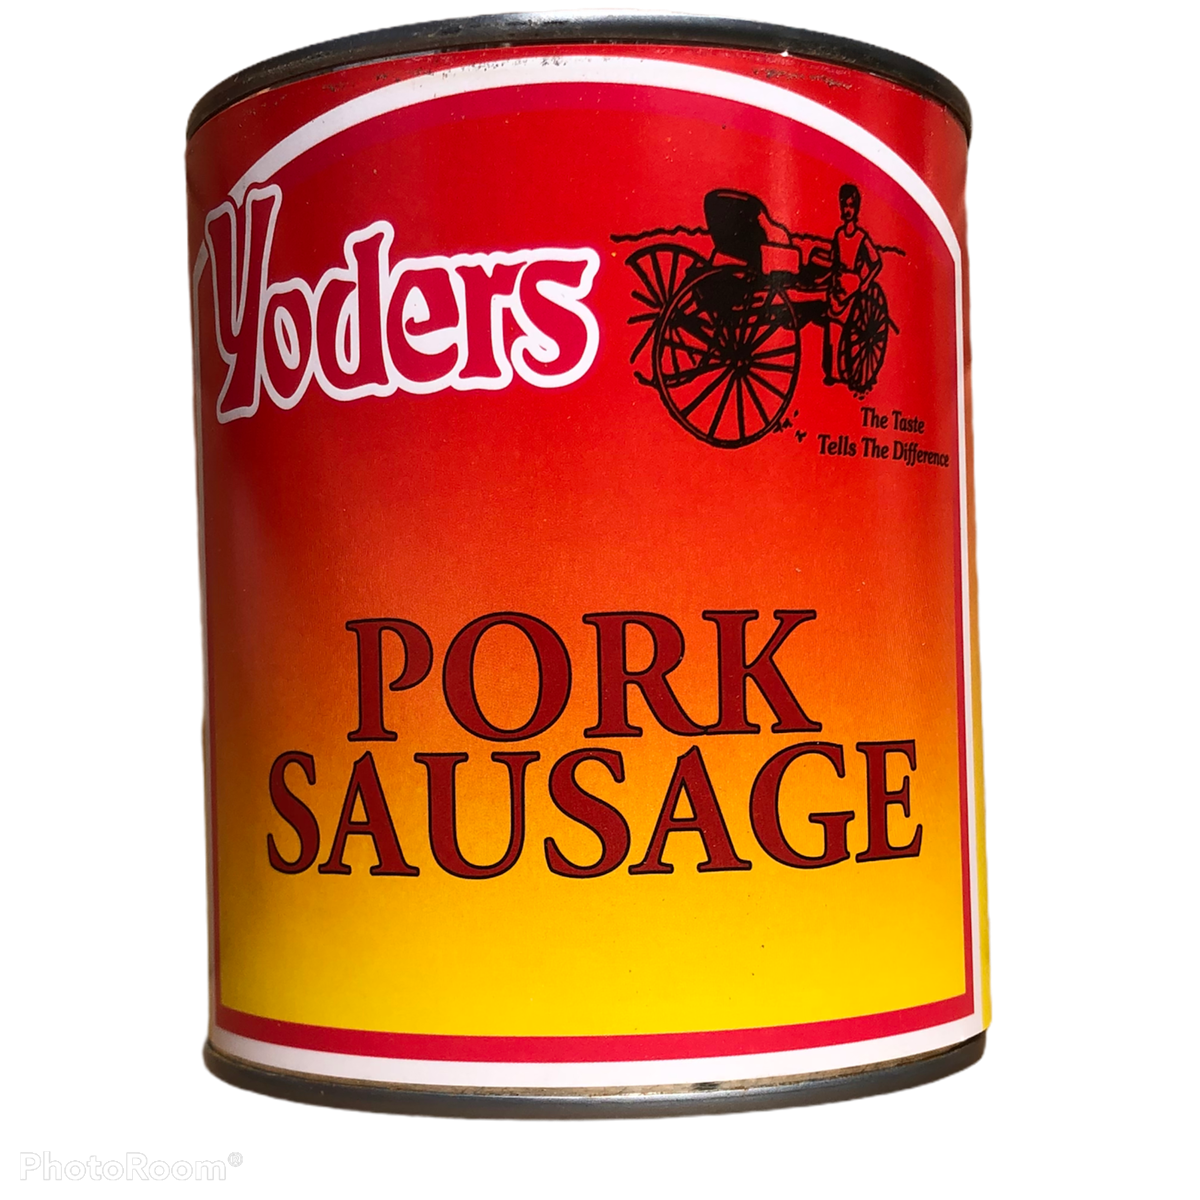 Case (12 Cans) of Yoder's fresh REAL Canned Pork Sausage